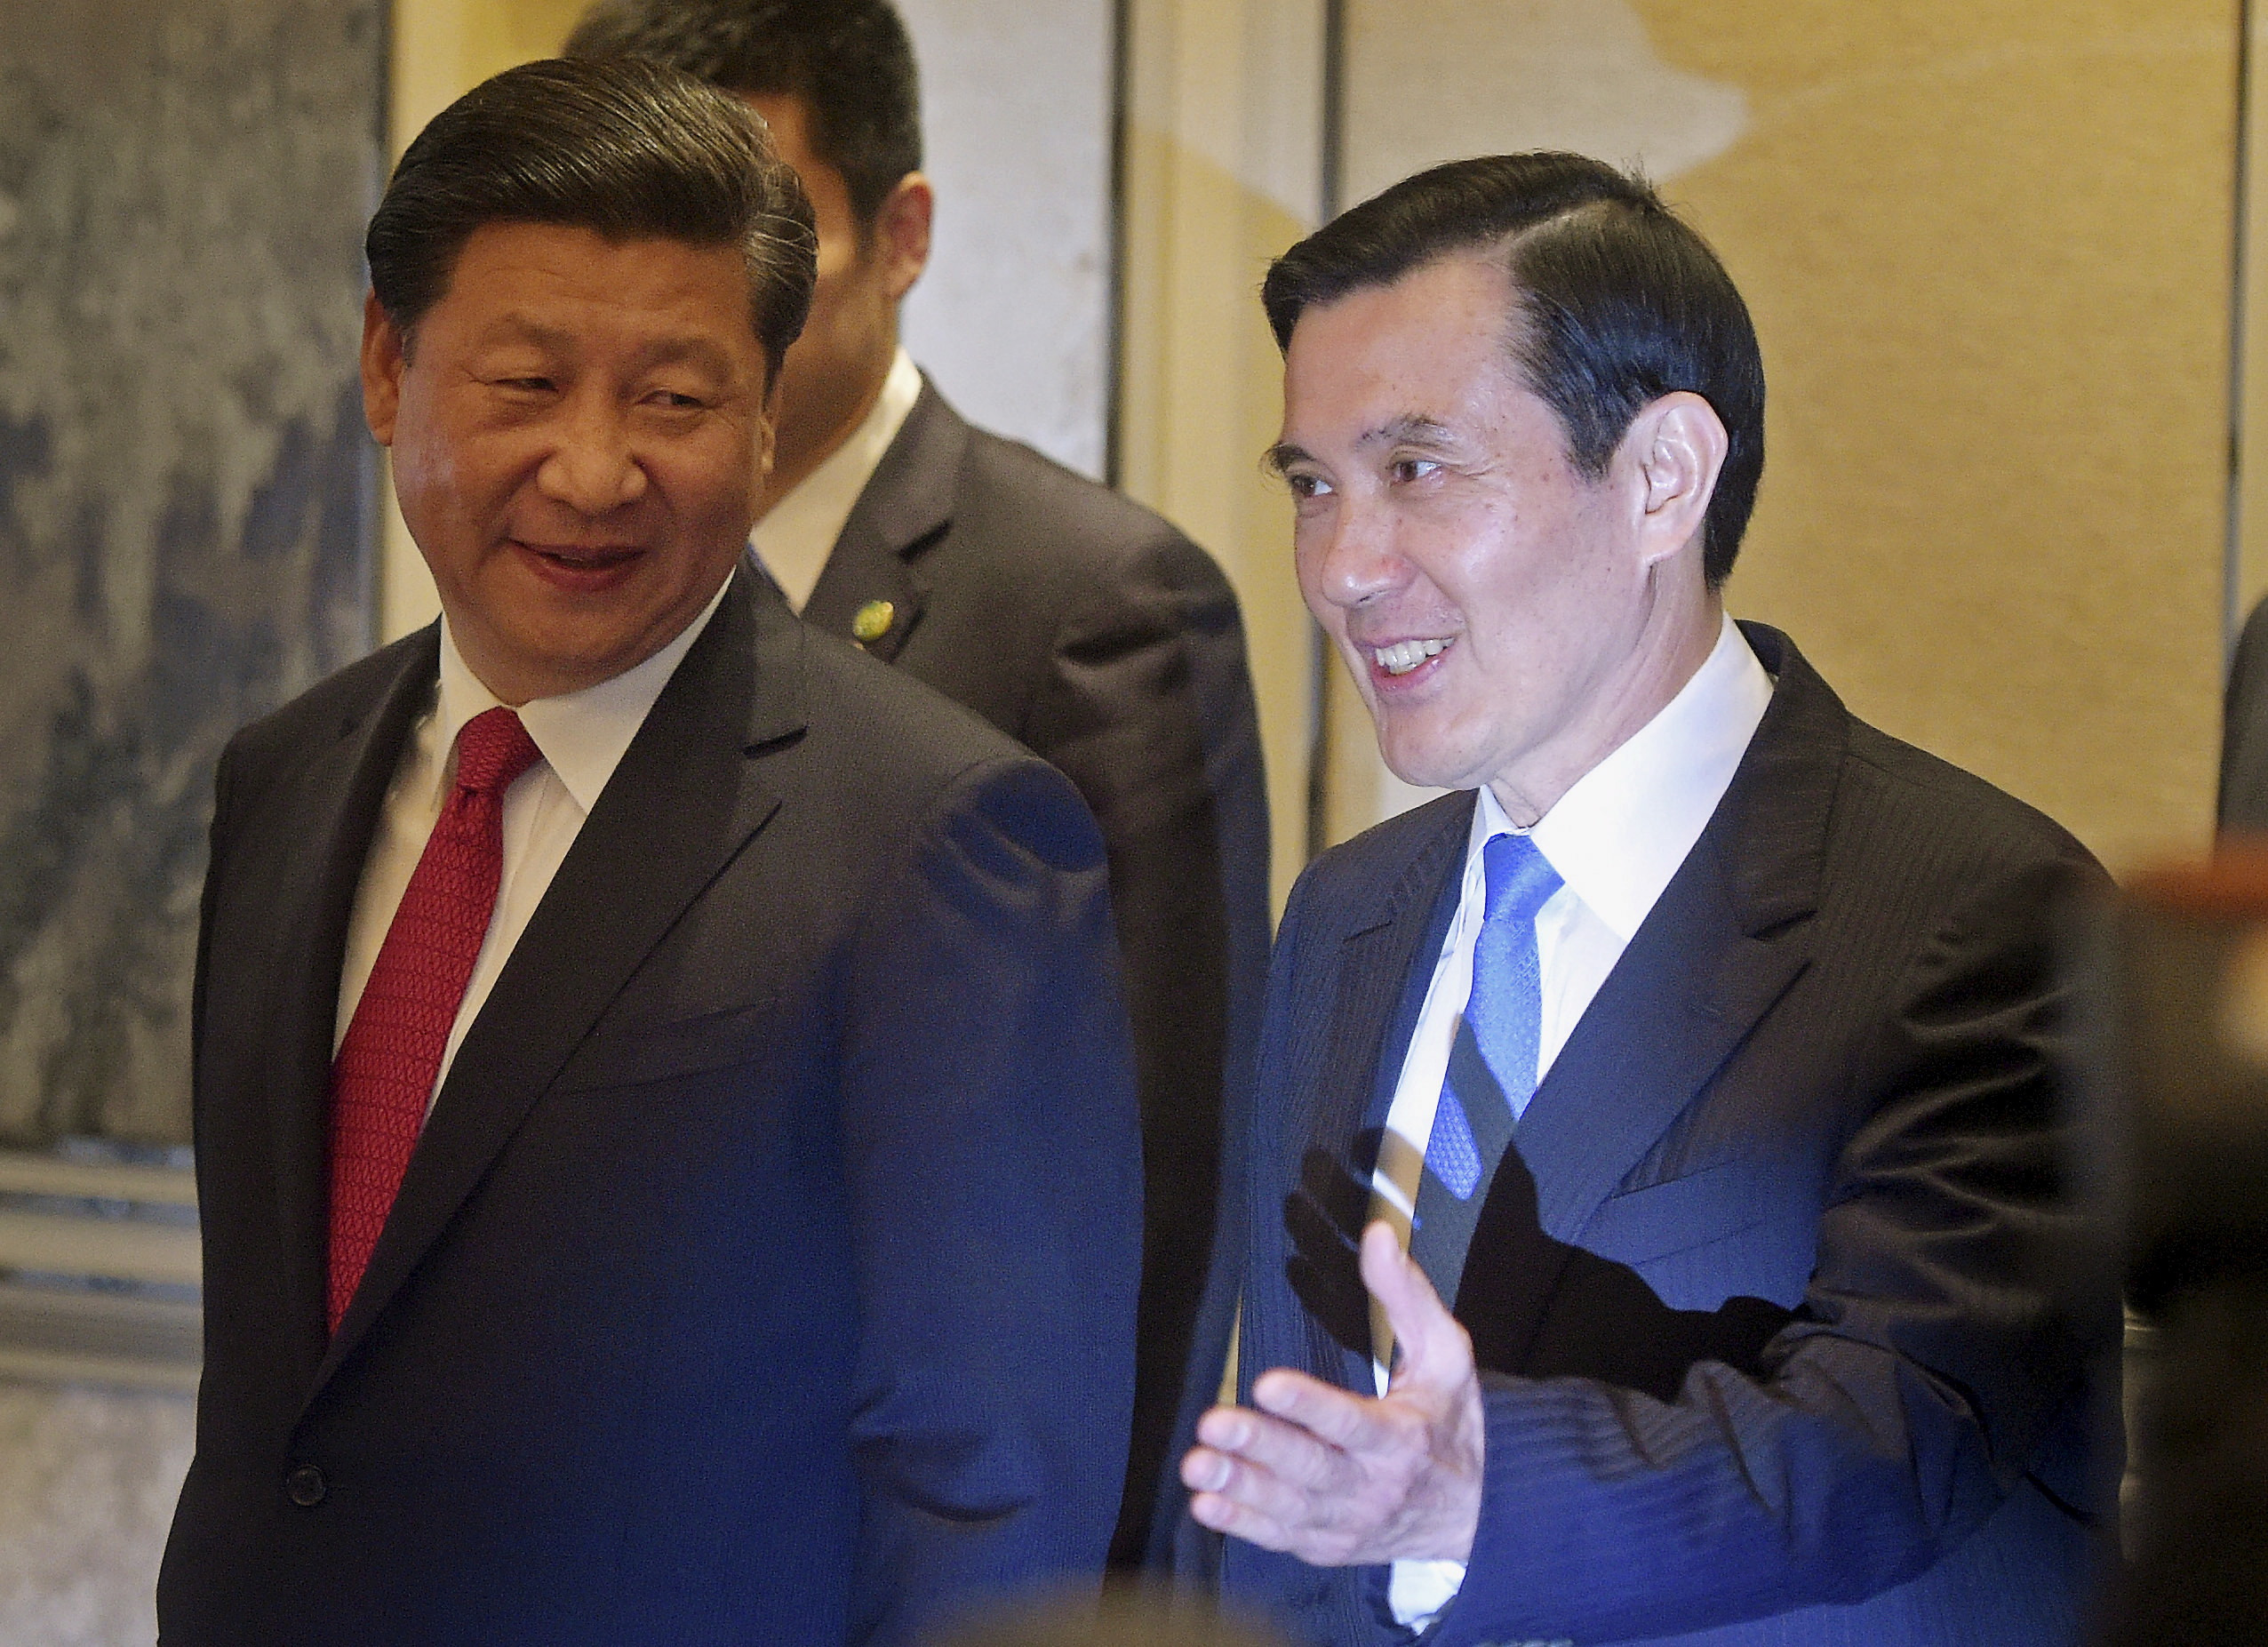 Chinese President Xi Jinping and Taiwanese President Ma Ying-jeou smile as they enter the room at the Shangri-la Hotel where they are to meet, in Singapore